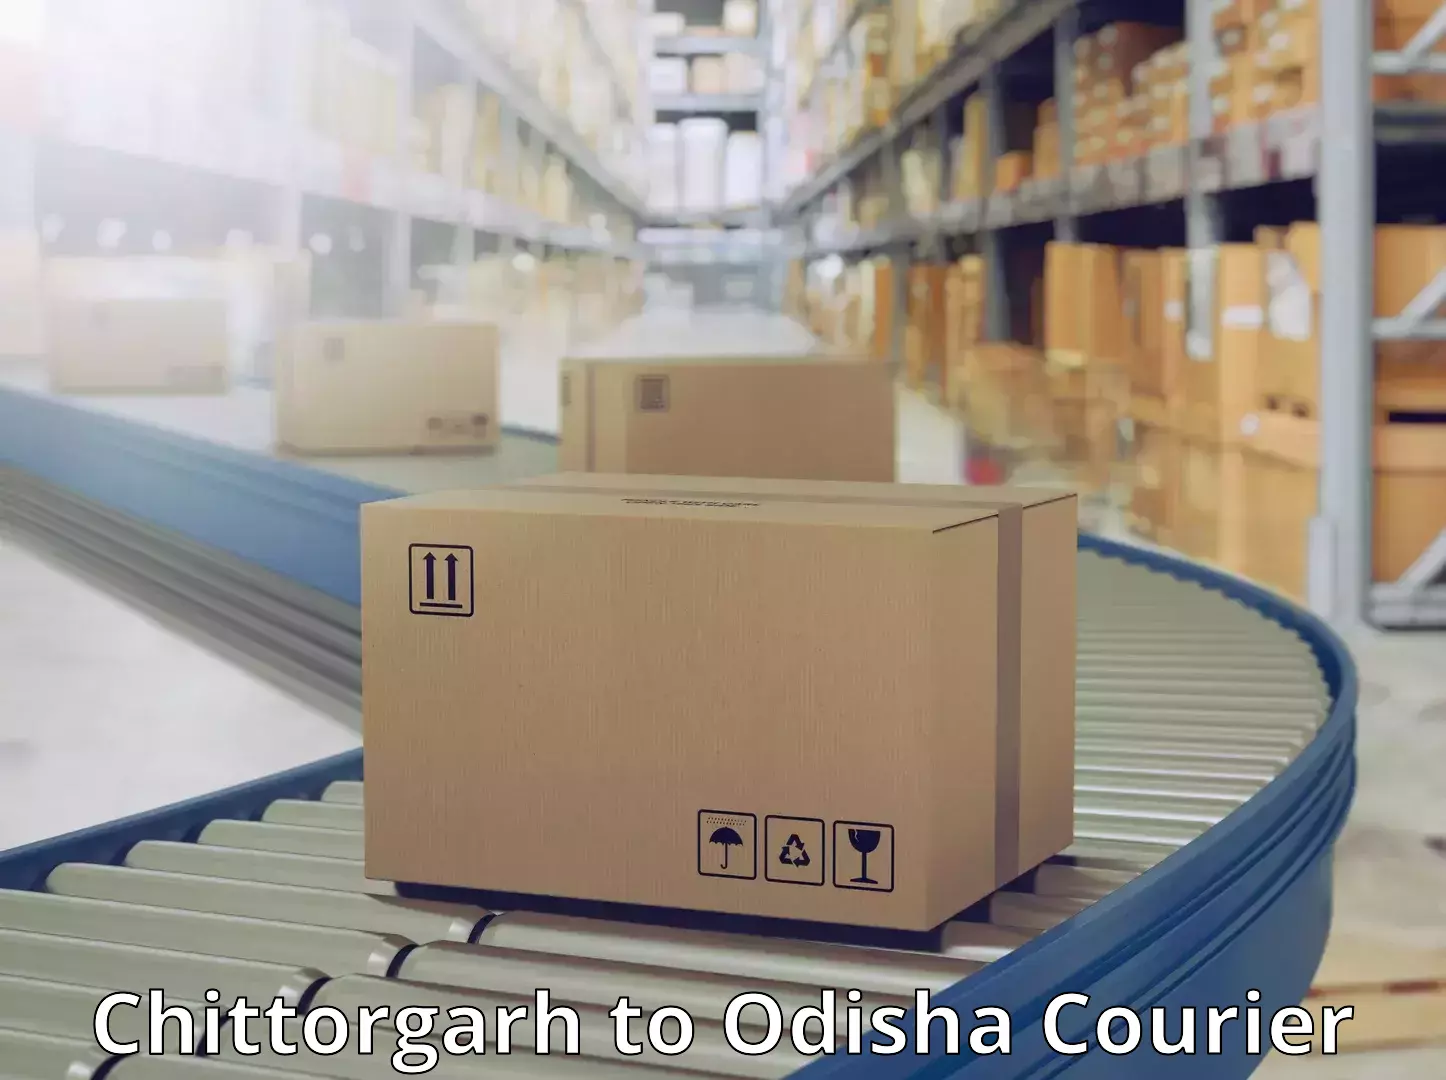 Subscription-based courier Chittorgarh to Kandhamal